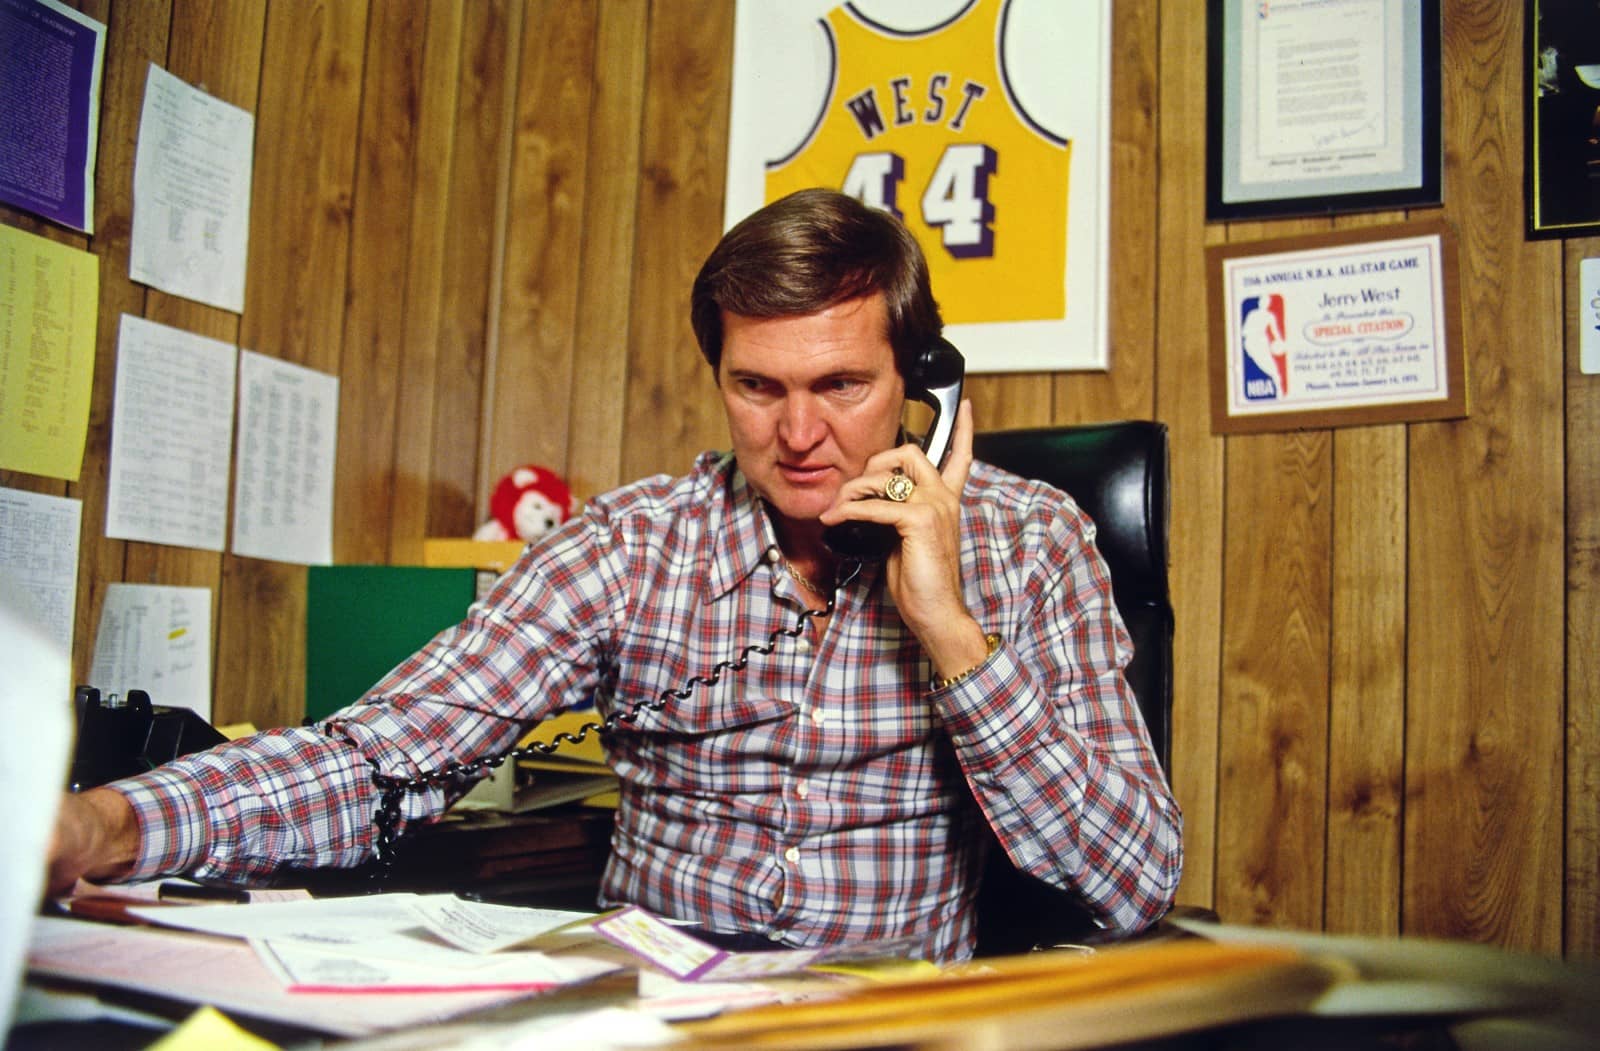 Jerry West Entrenador General Manager Los Angeles Lakers NBA